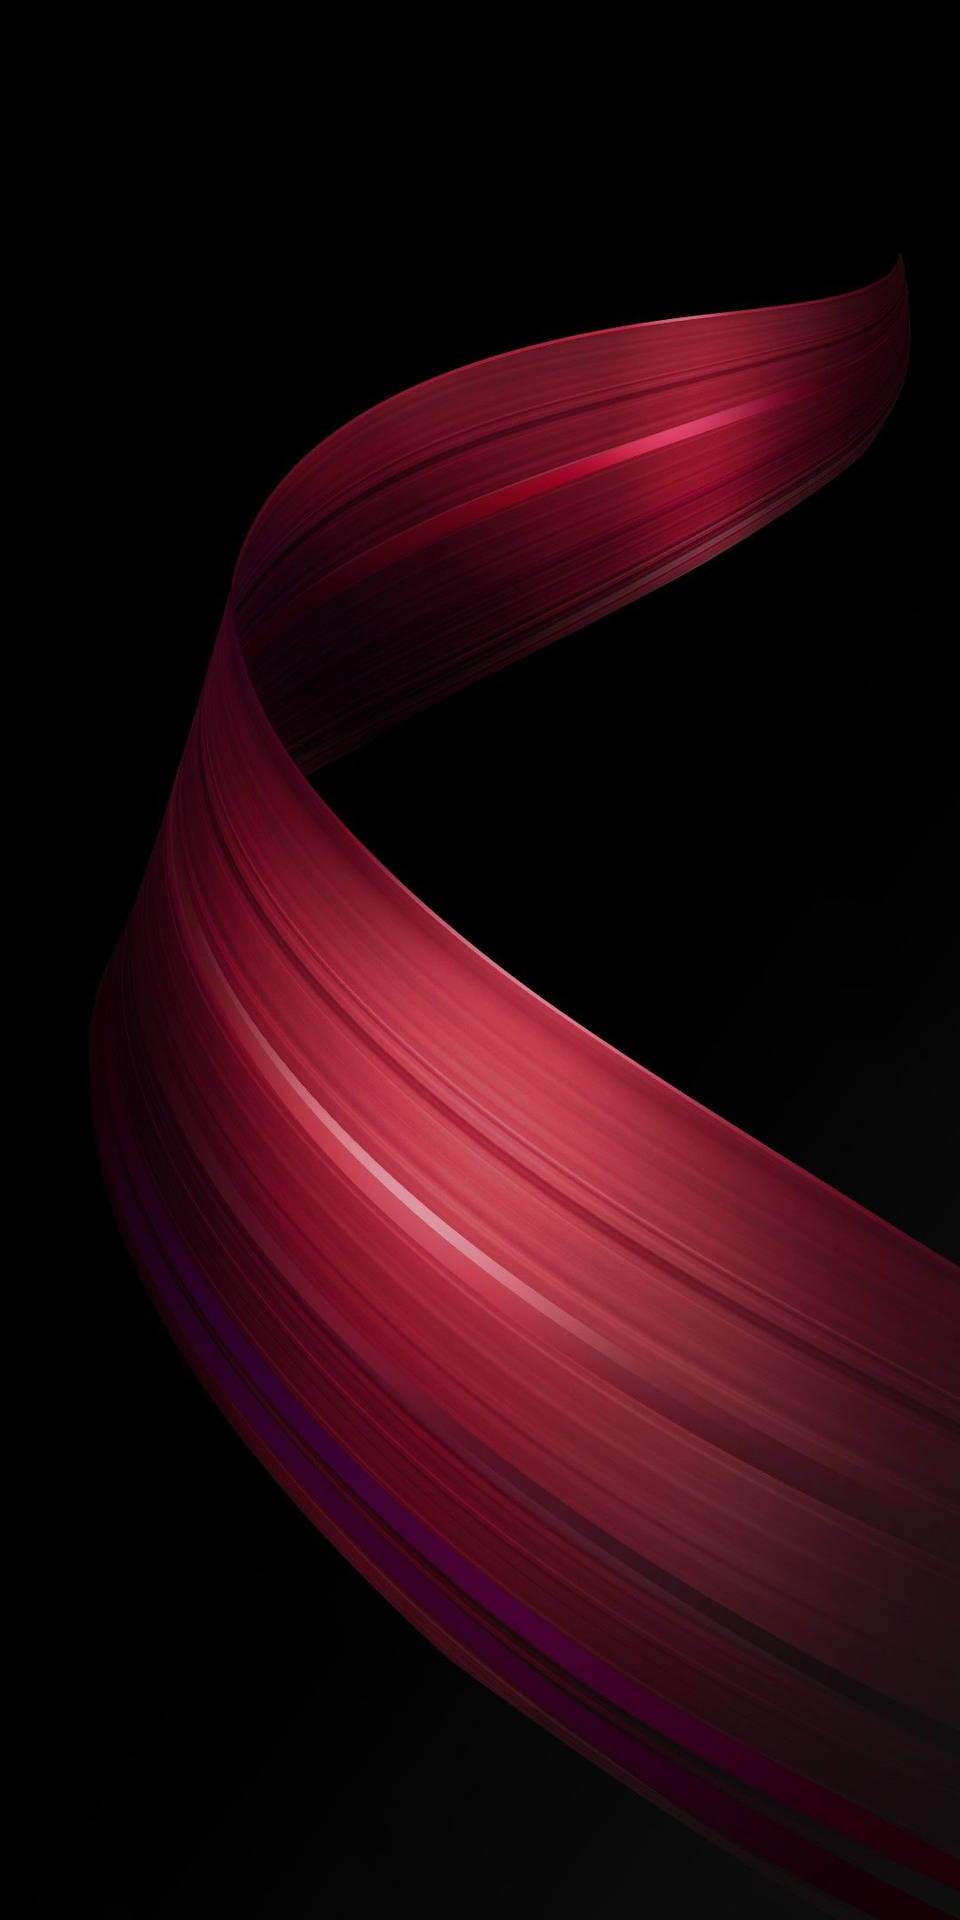 Abstract Red Ribbon Oppo A5s Wallpaper